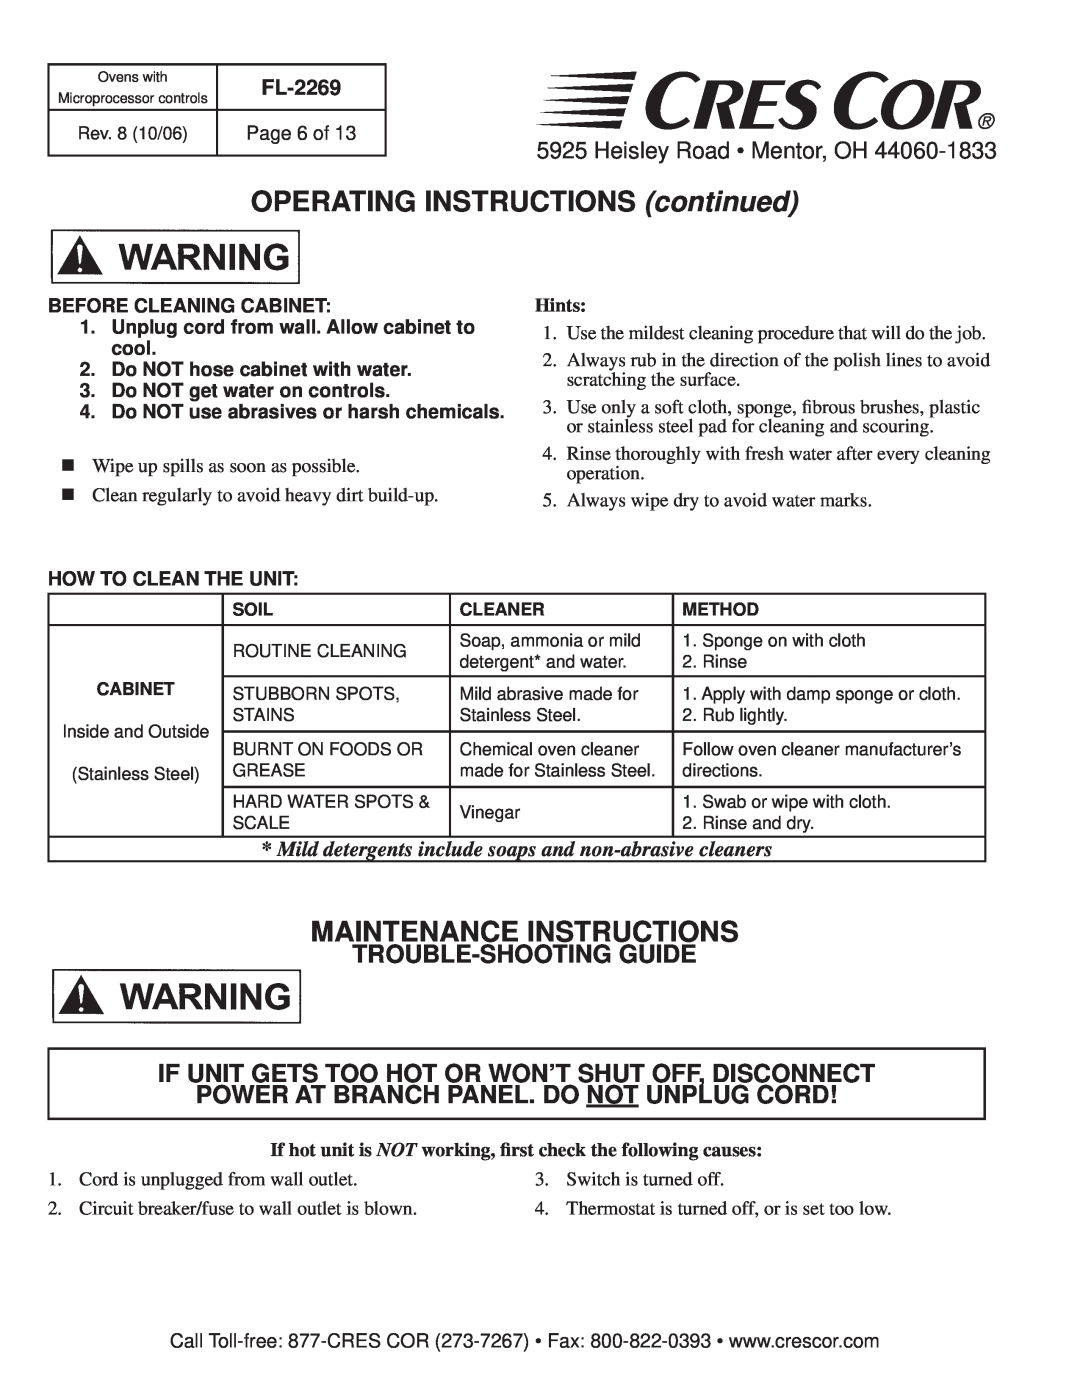 Cres Cor CO151H189B-Q1 Maintenance Instructions, Trouble-Shootingguide, Power At Branch Panel. Do Notunplug Cord, FL-2269 